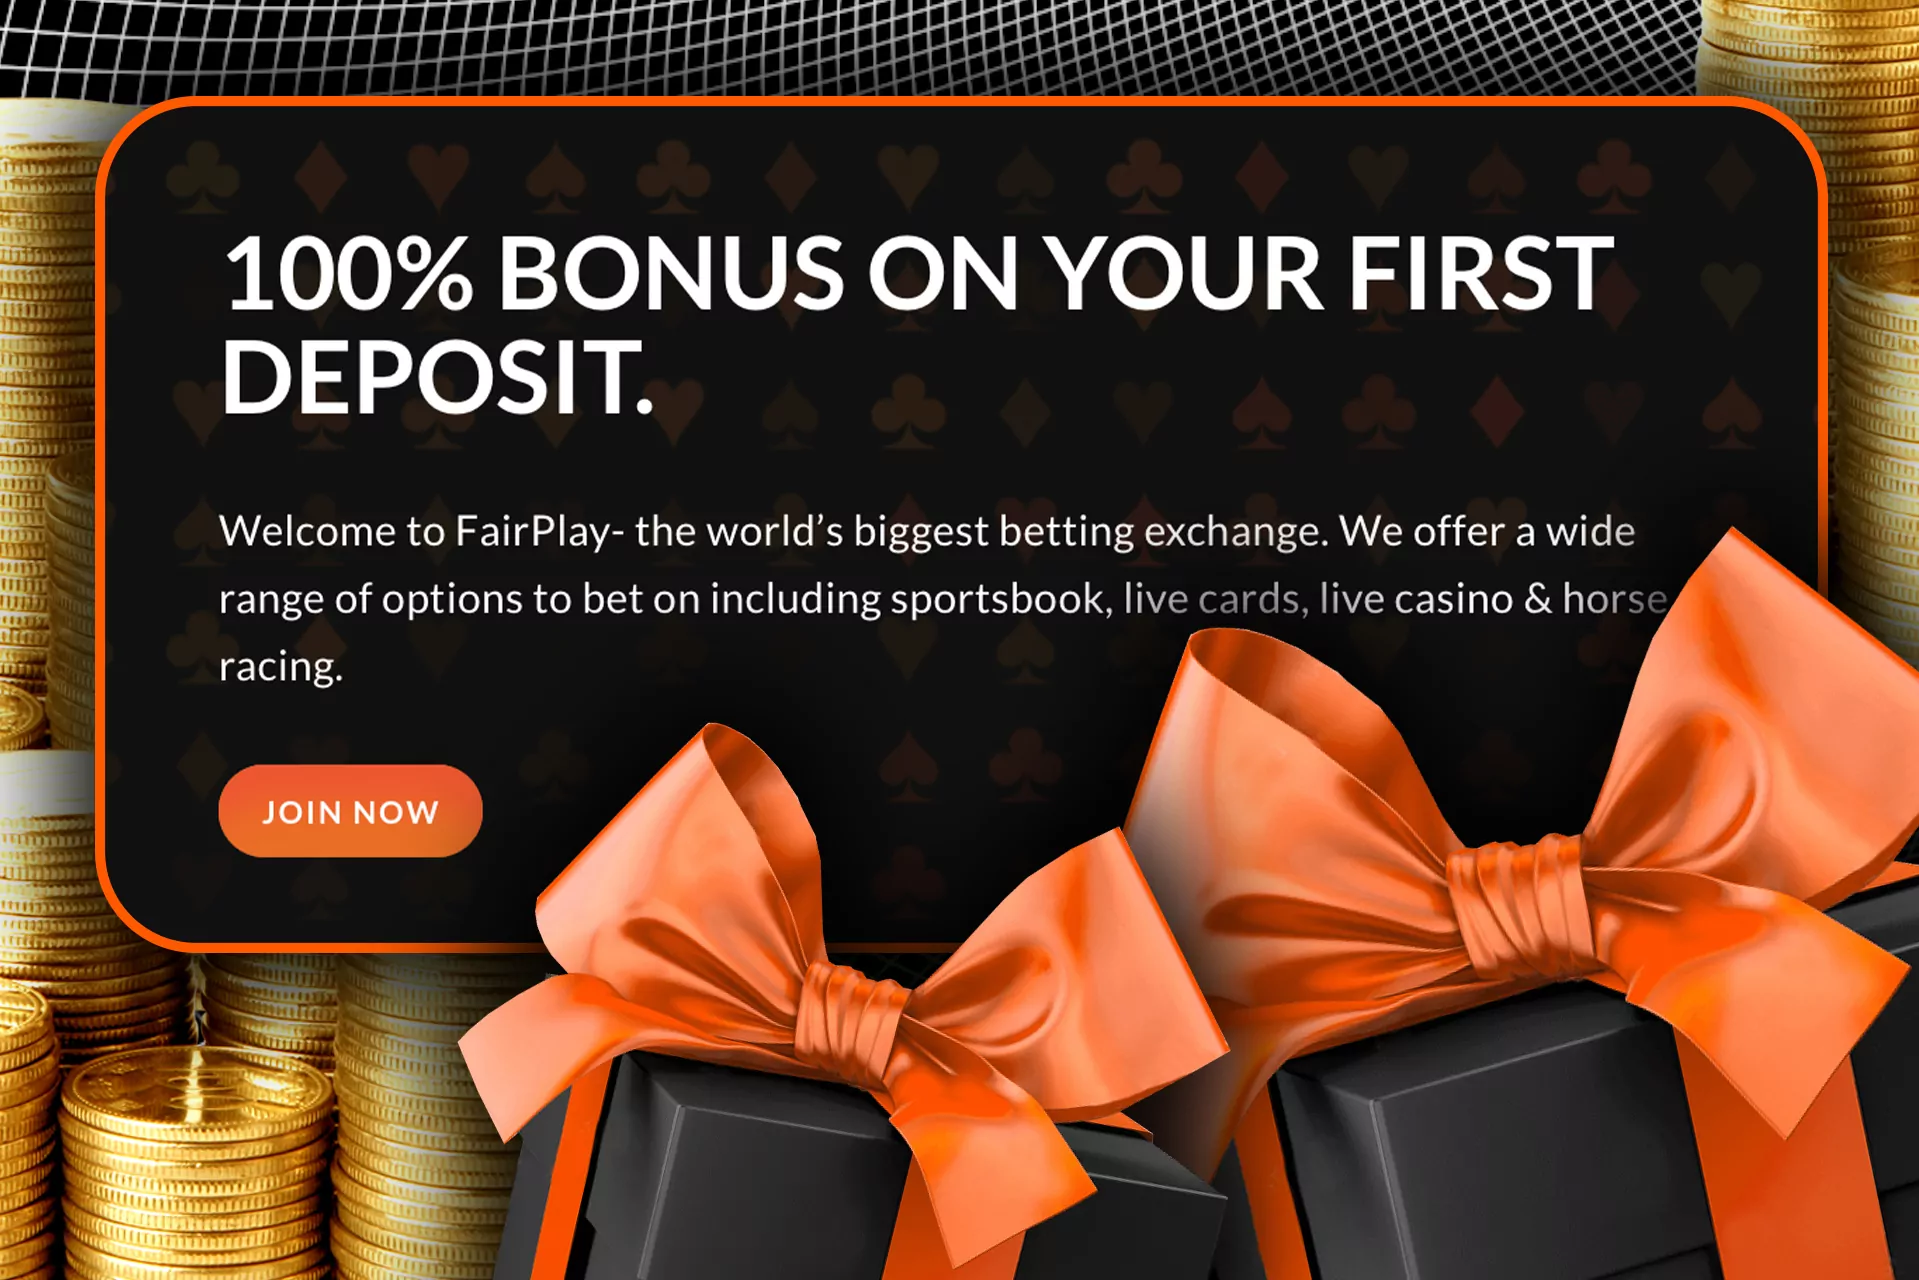 You can get an exlusive bonus right after the first deposit.